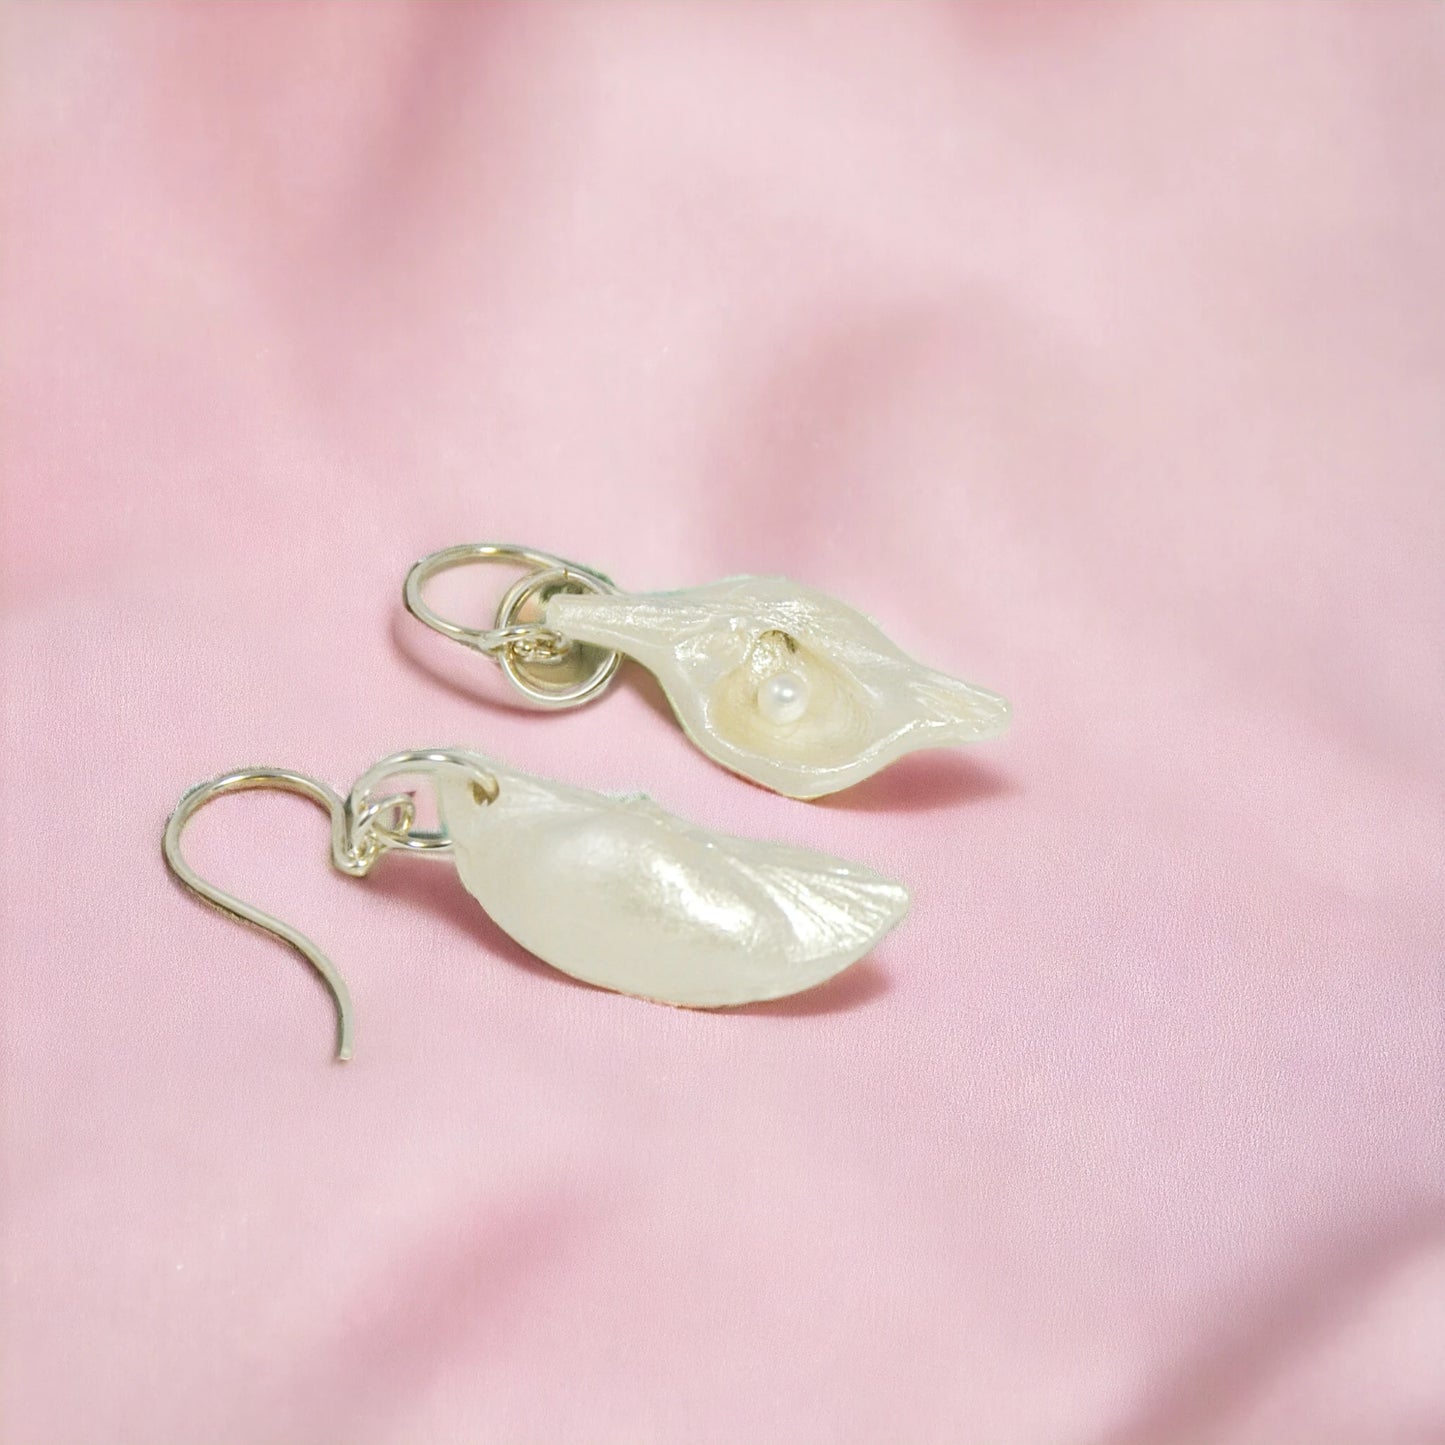 Harmony Earrings made of natural seashells and real freshwater pearls.  The pearls are shown on a pink background.